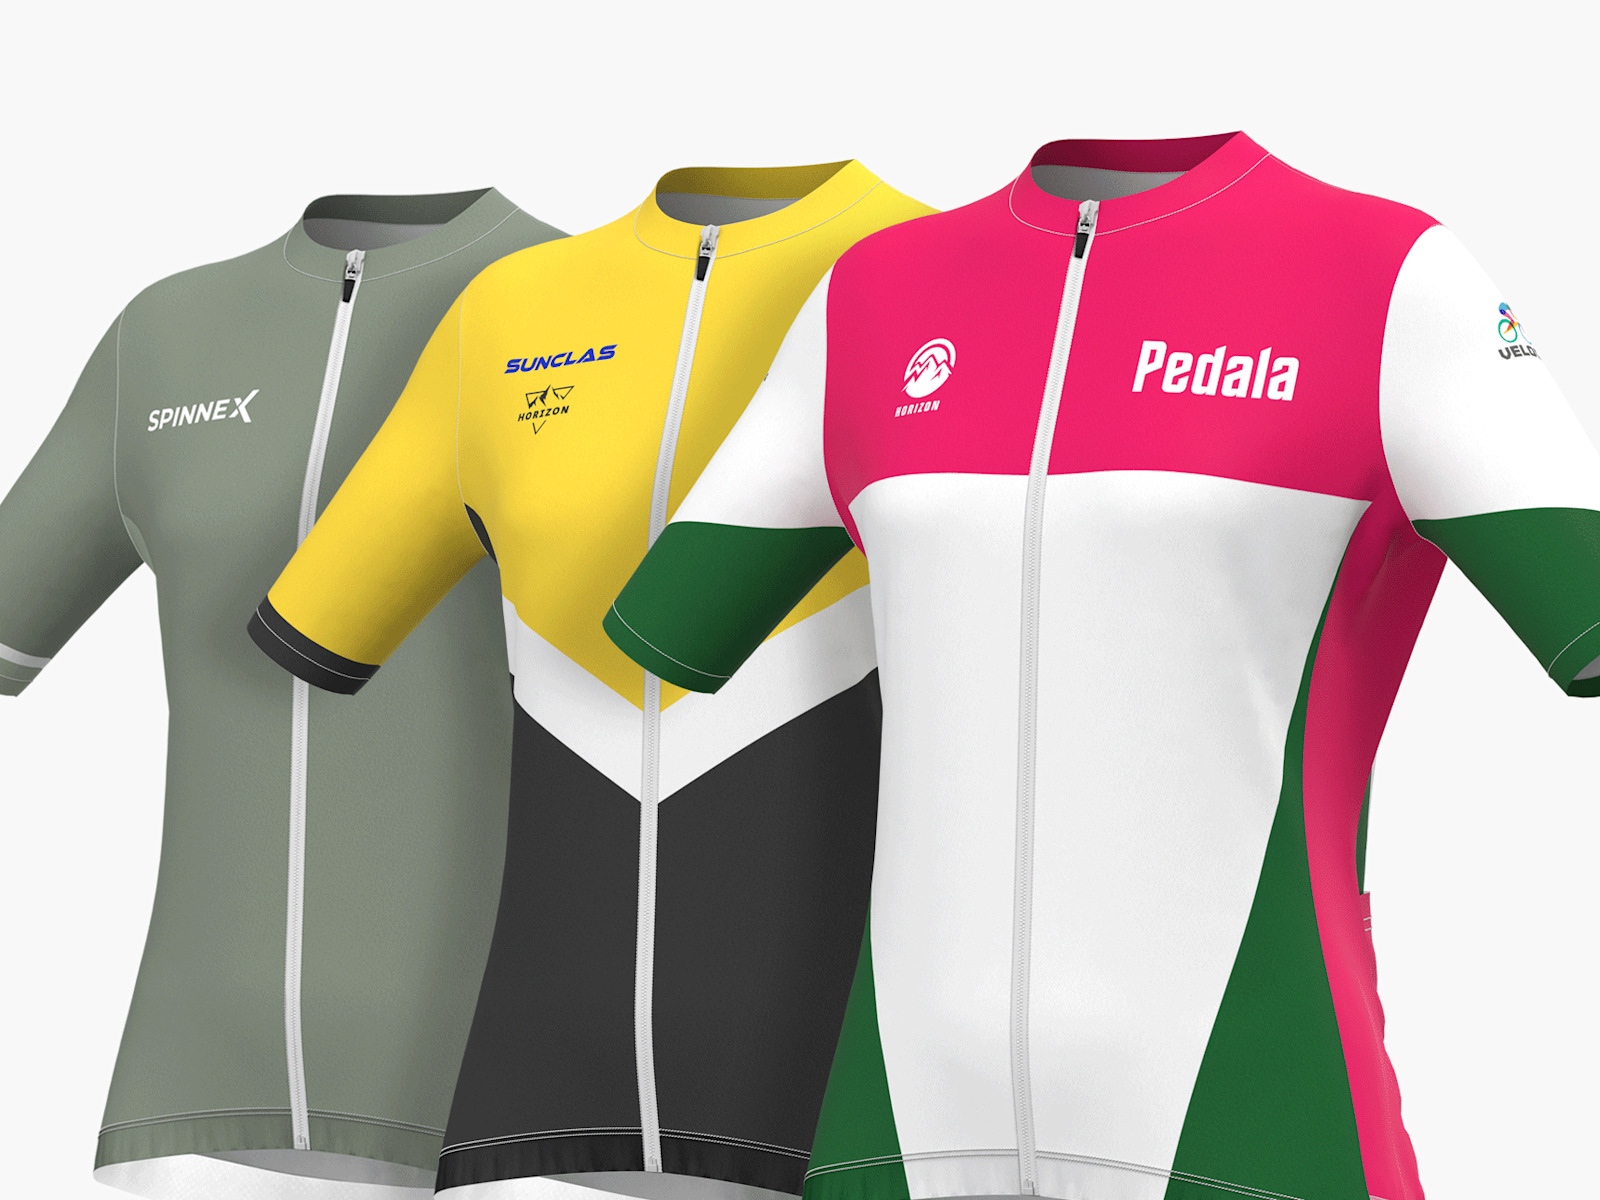 Larger version: 3 different patterns for a full Custom Women’s Cycling Jersey promoting three cycling businesses with a design detail on the front.